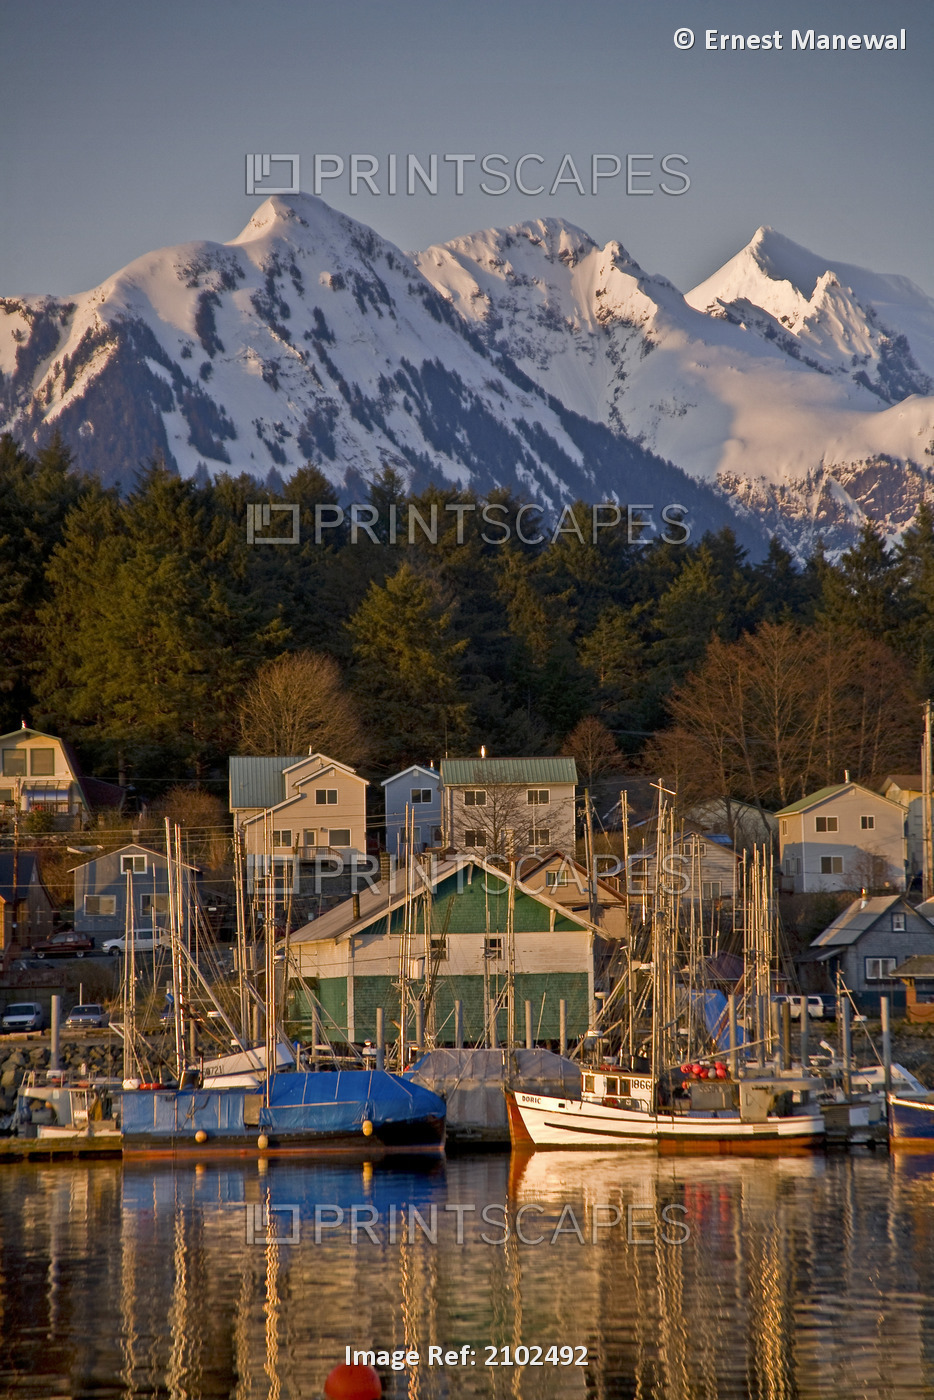 Downtown Sitka And And Small Boat Harbor With Arrowhead Peak In The Background, ...